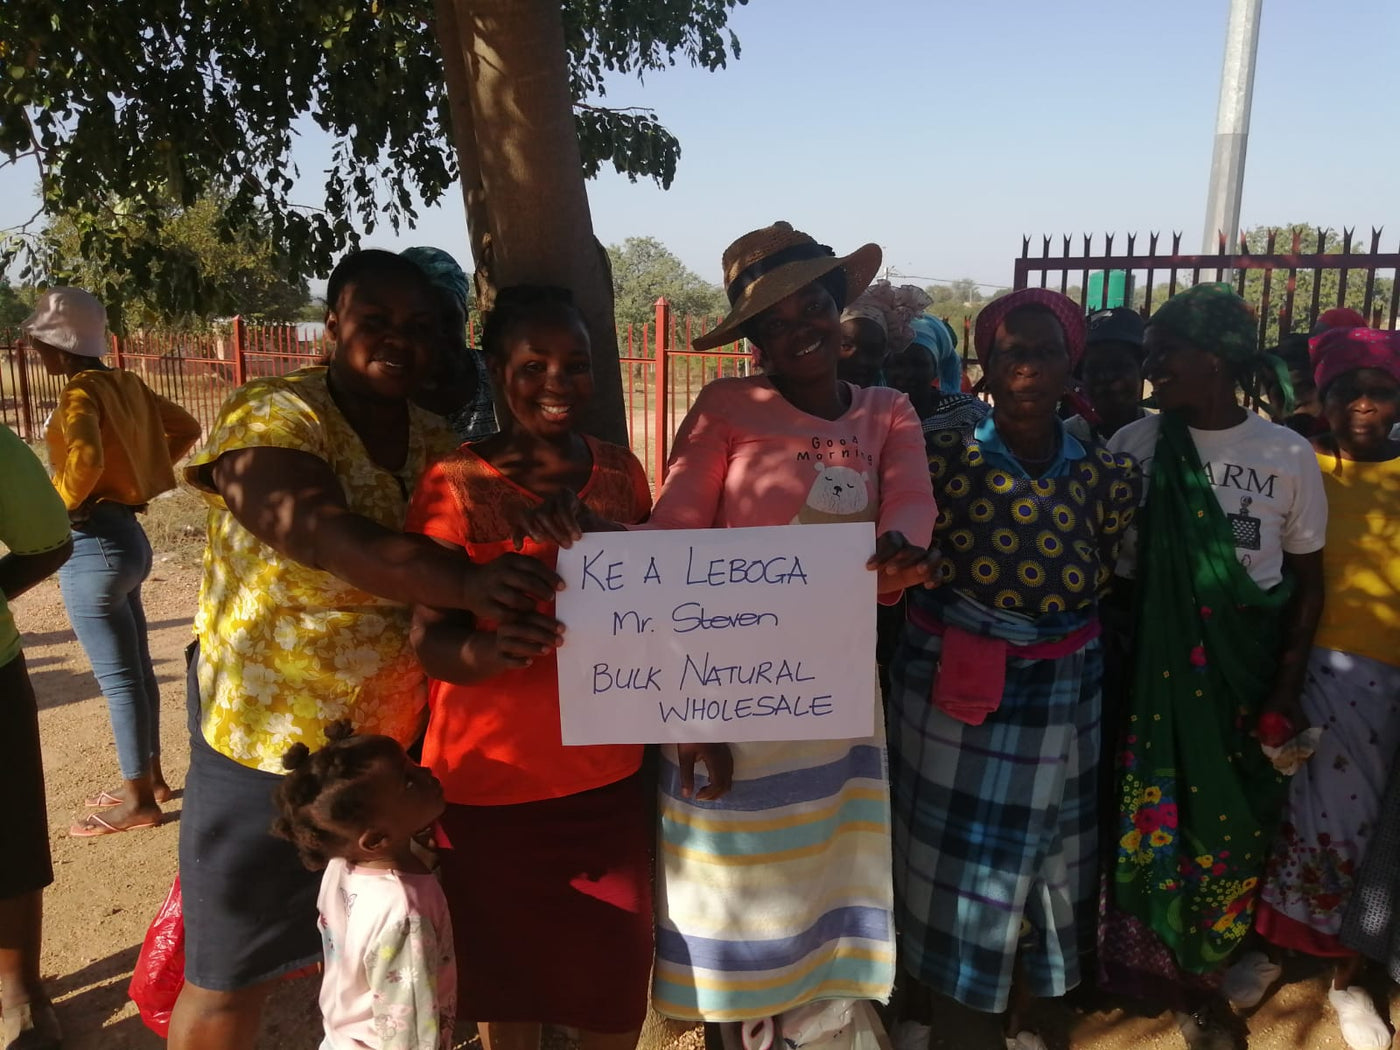 FIND OUT HOW BULK NATURALS SAVED A SOUTH AFRICAN COMMUNITY